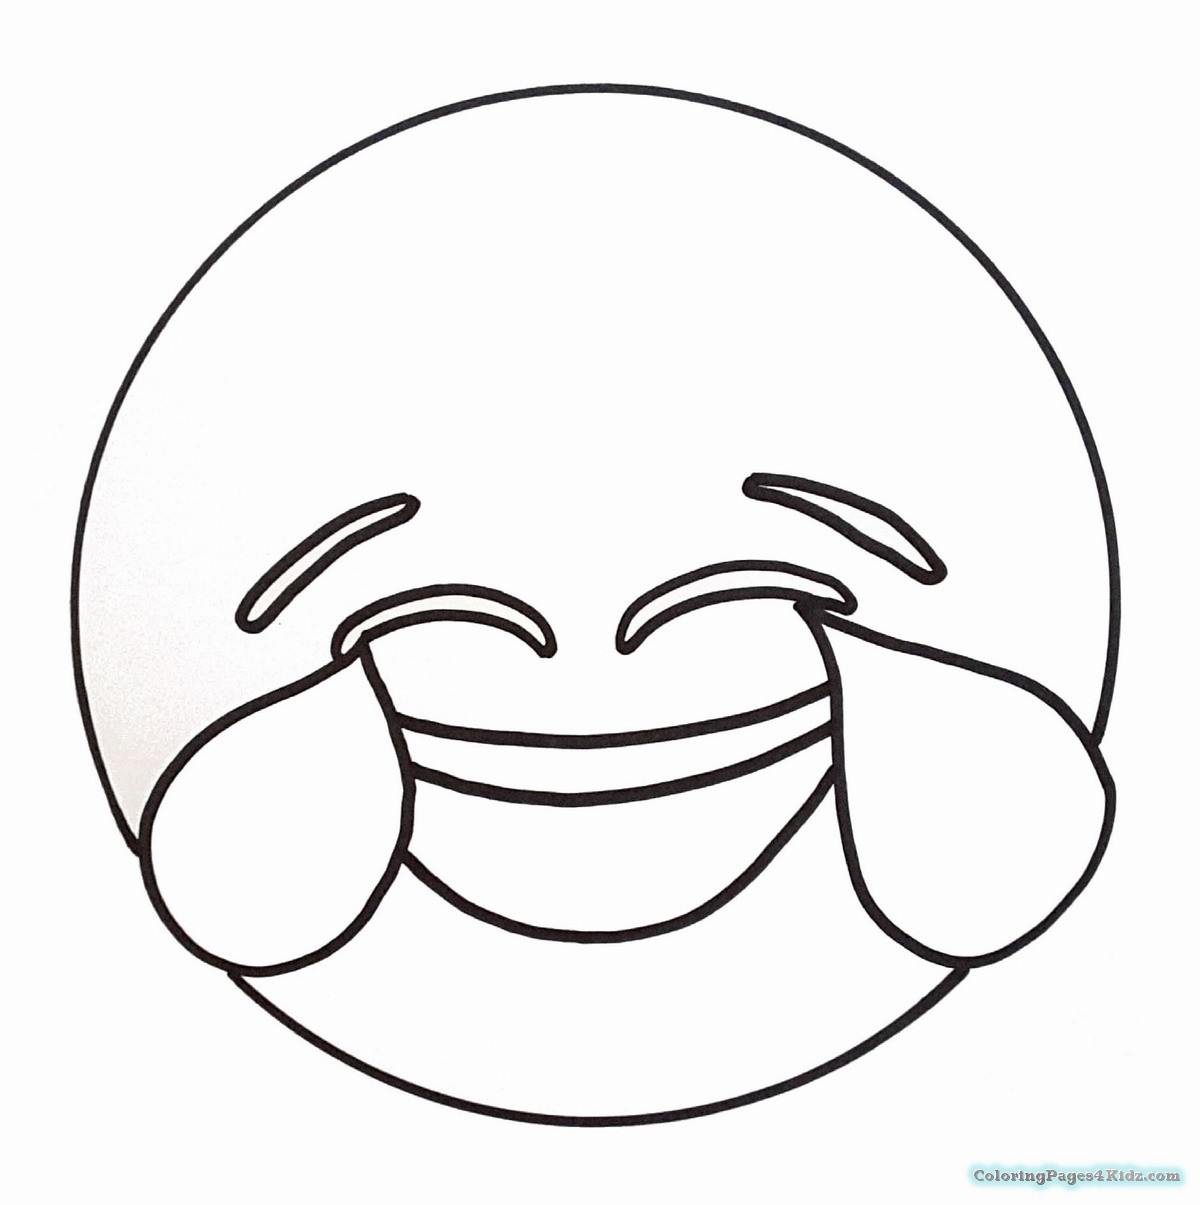 Coloring Pages : Coloring Pages Emoji All Free Printable ...